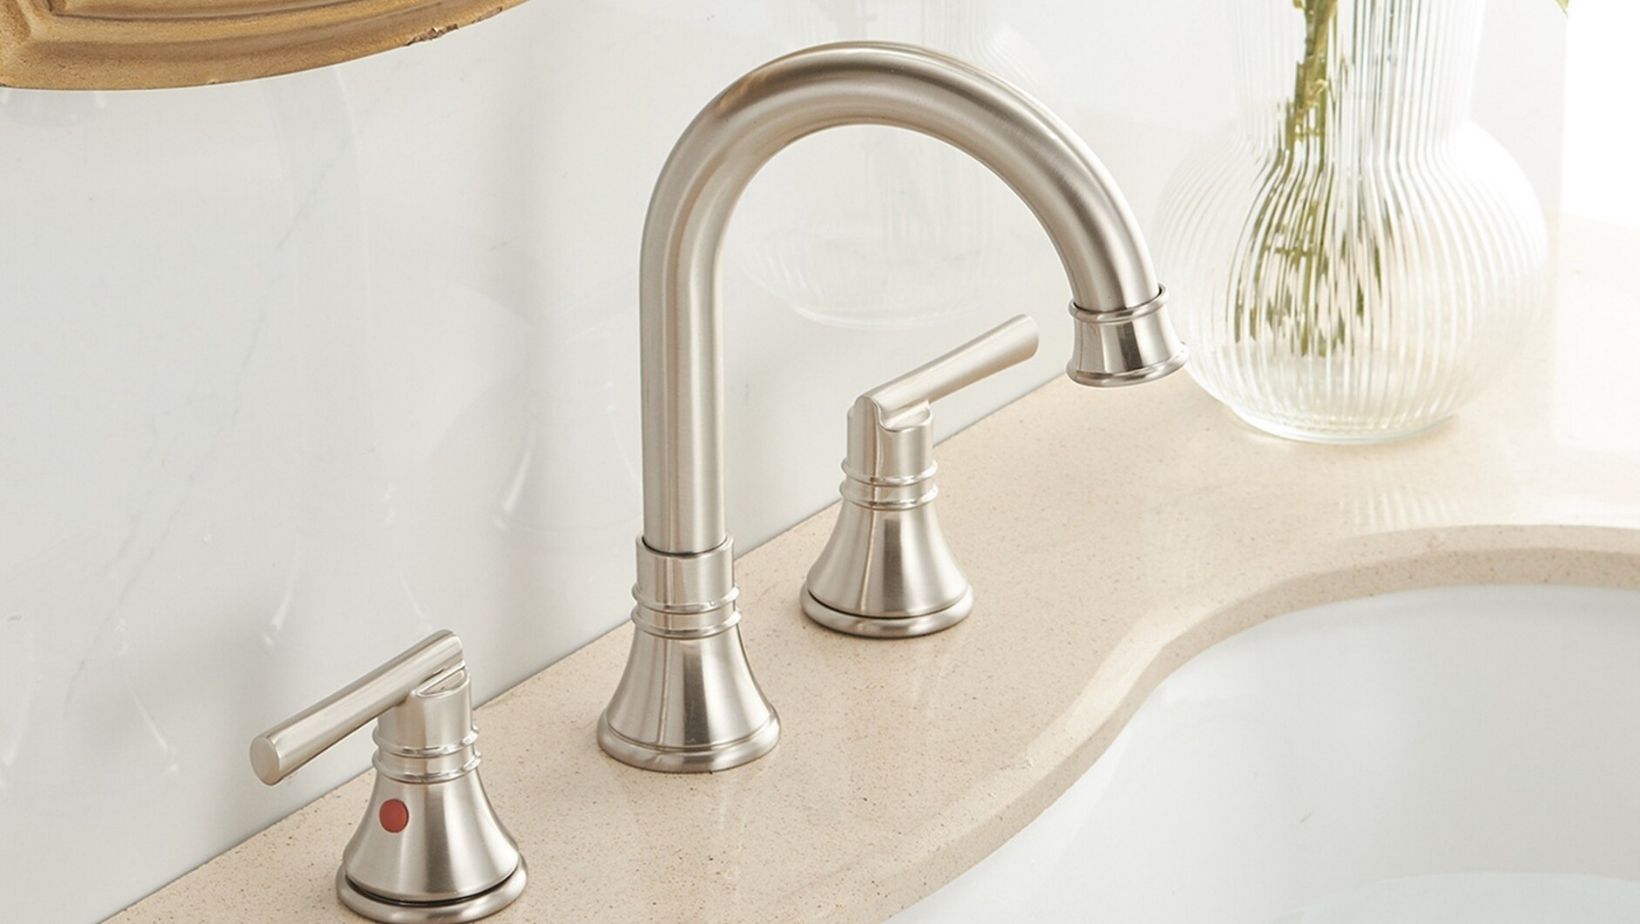 Upgrade Your Bathroom with the Brushed Nickel Widespread Sink Faucet